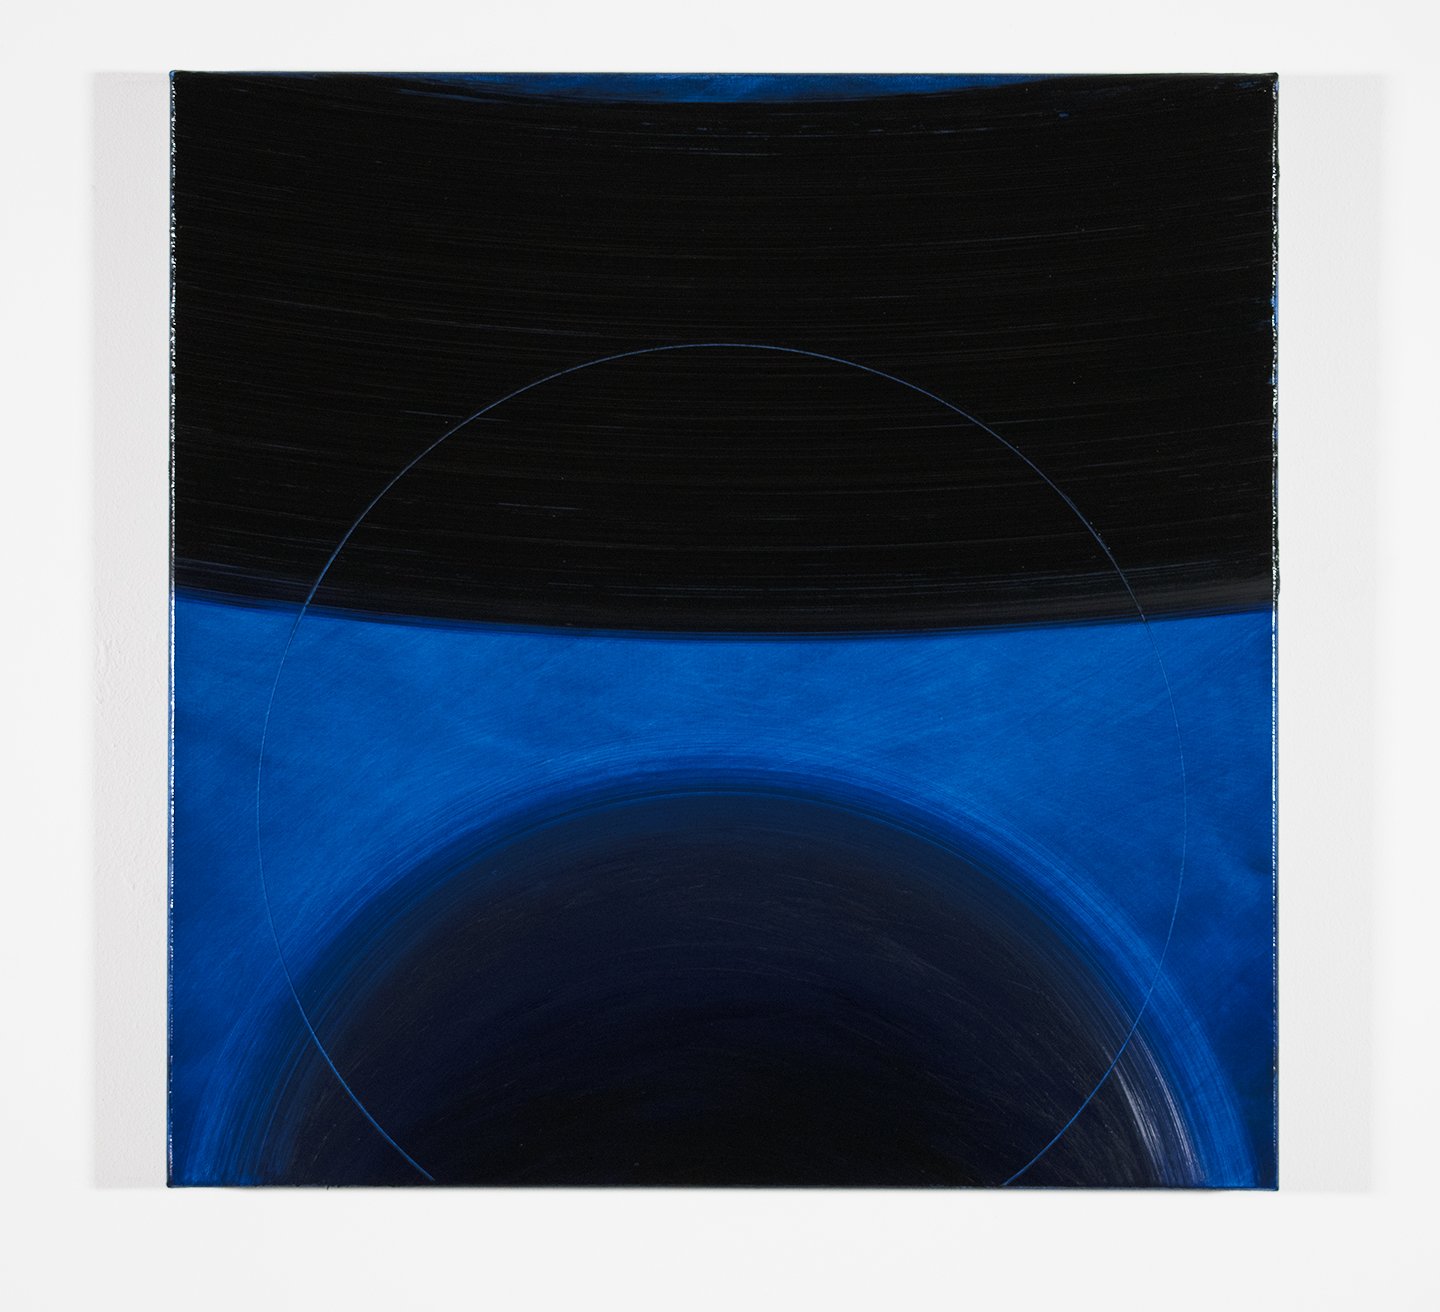 4 Above-metrum [2001-20220206], oil on canvas, 23.63x23.63 in. [60x60cm]_a (Copy)